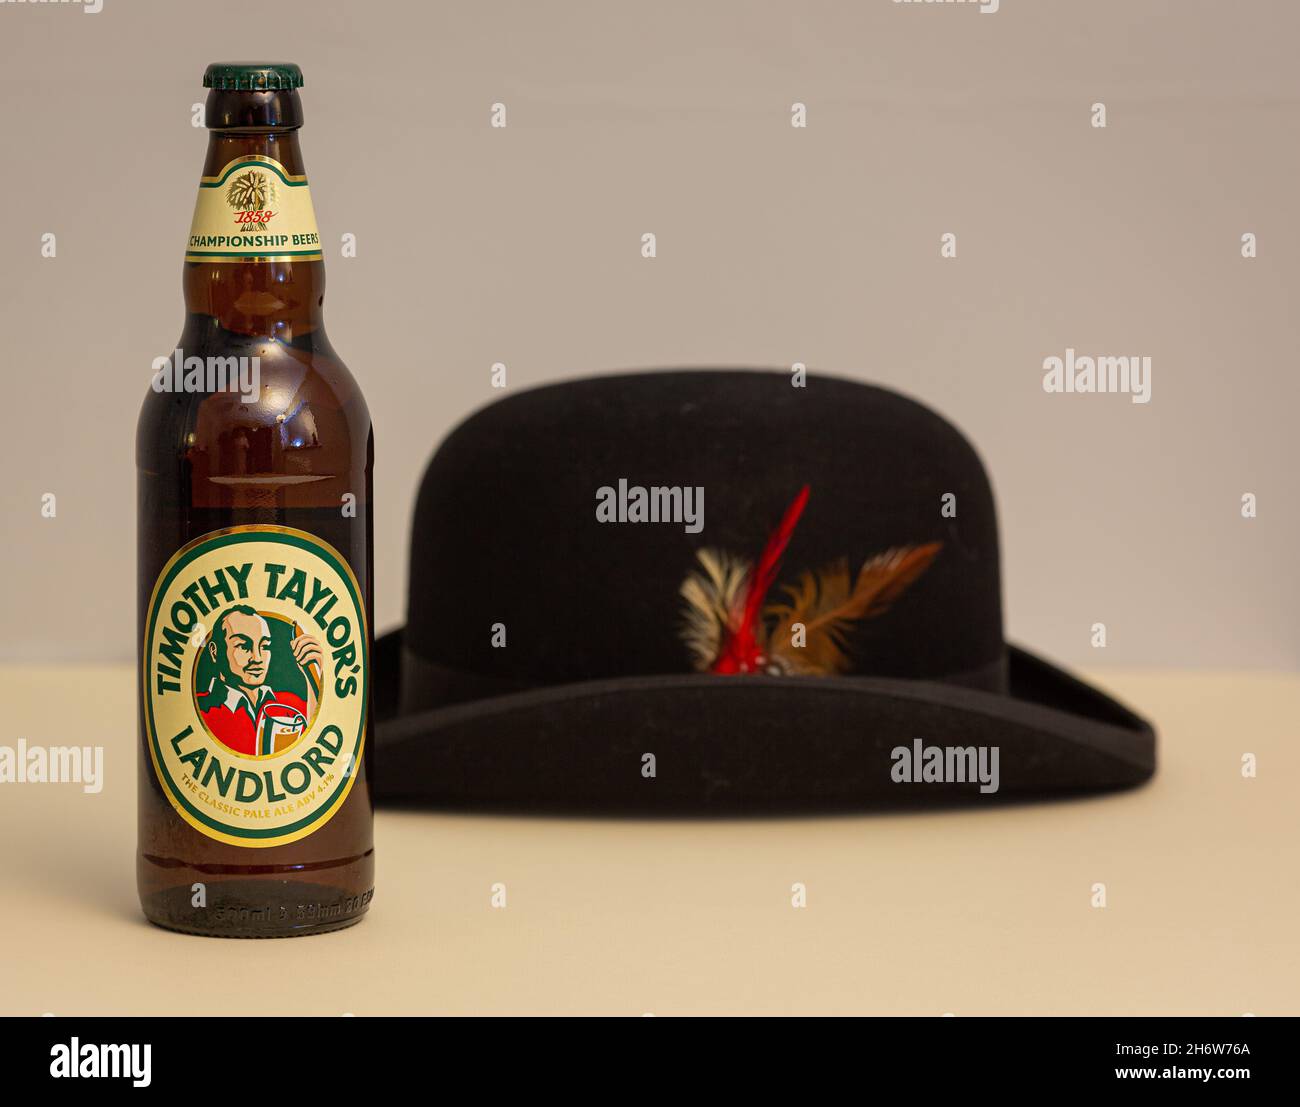 Bottle of Timothy Taylor's Landlord Pale Ale and Drayman's Hat Stock Photo